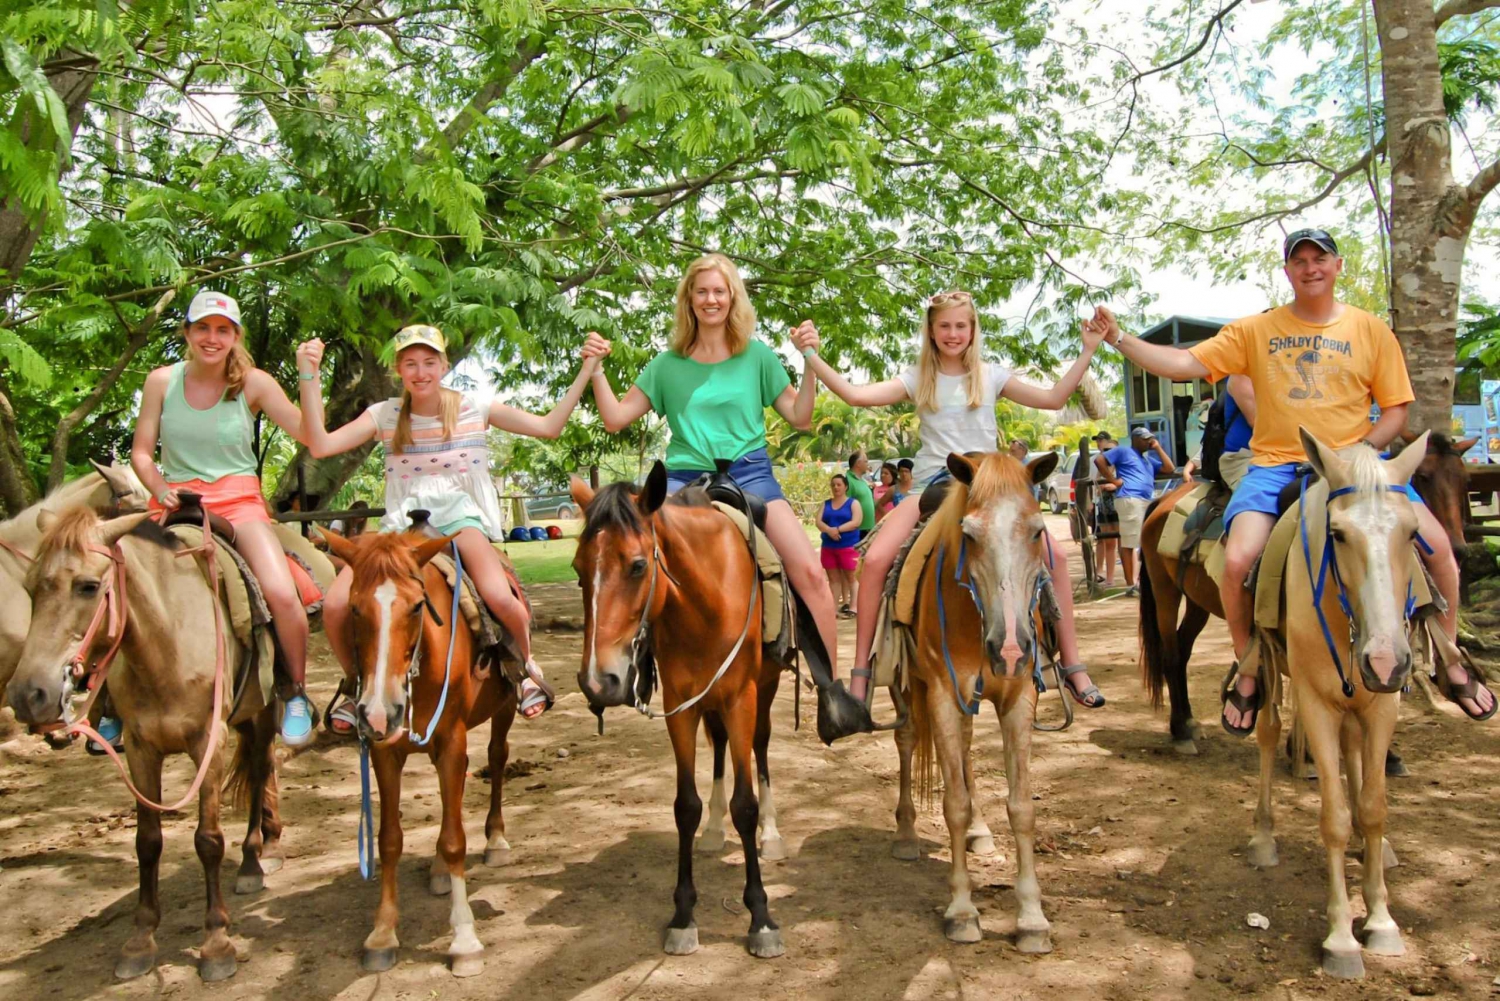 Punta cana: Incredible horse back riding experience day trip